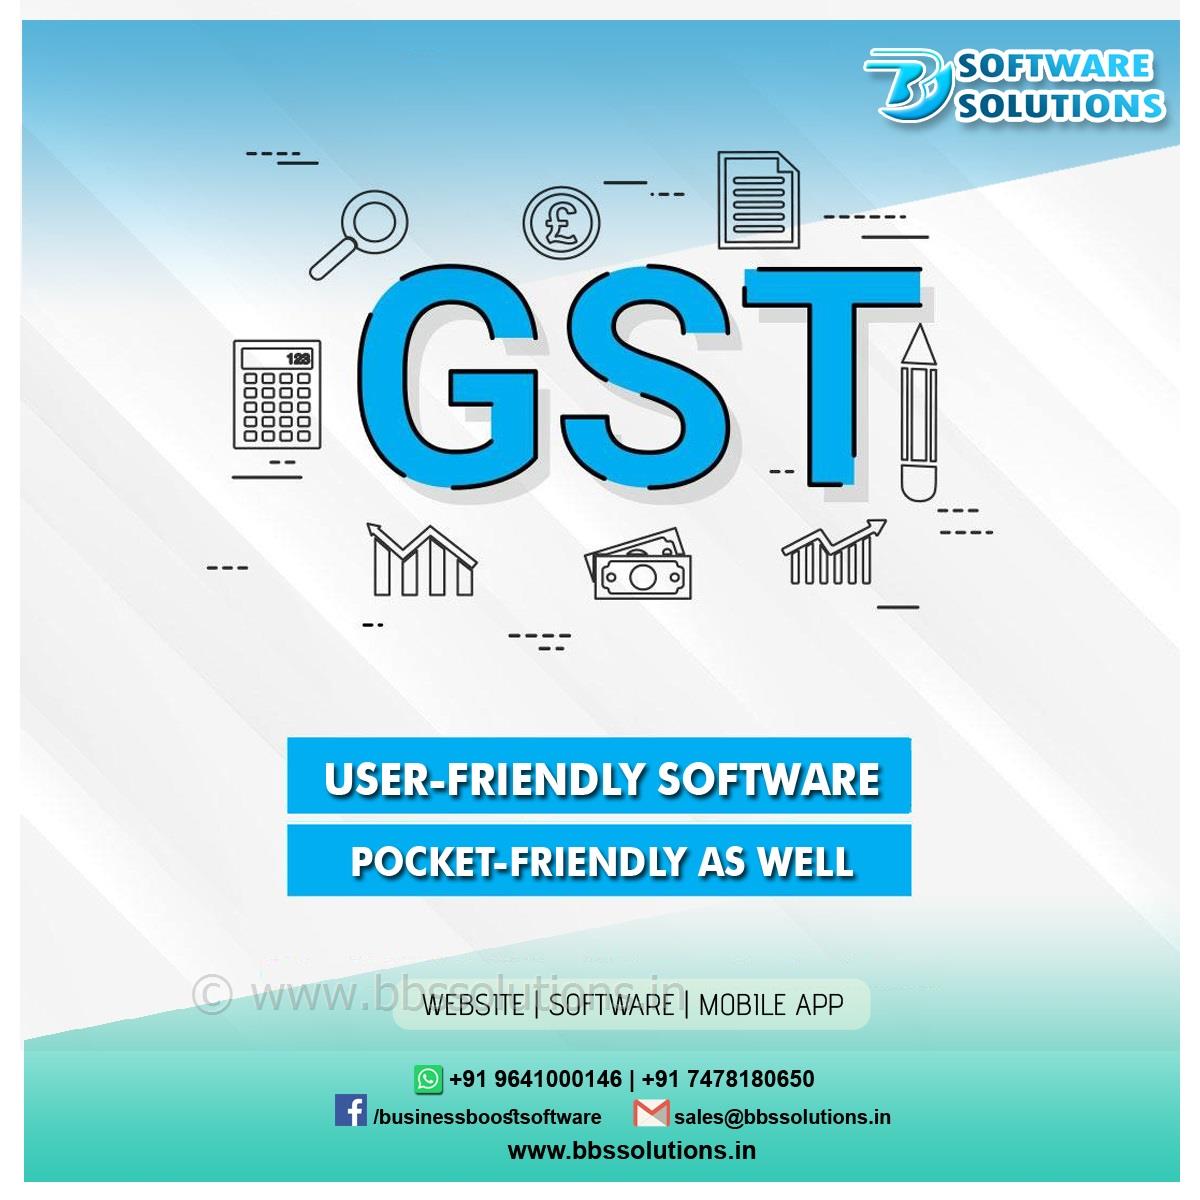 Transform Your Business with Advanced GST Software: Automated Messaging and QR Code-Enabled UPI Payments  , Business Boost Software Solutions do Best Software ,Web Development,Mobile App solutions provider in siliguri , india, WestBengal , Assam , Siliguri , Jalpaiguri ,Dhupguri,
    Best website designing in Siliguri with affordable packages and quick support. Get effective website design in Siliguri from best website designers. #bbssolutions , #SEO  , #DigitalMarketing  , #WebDesign  , #SoftwareDevelopment  , #FacebookAds  , #GoogleAds  , #GoogleSEO  , #WebsiteDesigning 
     , #Software  , #website  , #BusinessBoostSoftwareSolutions  , bbssolutions,SEO, Digital Marketing, WebDesign, Software Development, Facebook Ads, Google Ads, Google SEO, Website Designing, 
    Software, website, Business Boost Software Solutions, 9641000146,7478180650,best GST software in West bengal,Best GST software company in north bengal,GST solution in west bengal
    ,gst solutions in north bengal,best customize software in siliguri , india,best customize software in west bengal,best customize software in dhupguri,news portal website in west bengal
    ,news portal website in siliguri , india,regional news portal website in siliguri , india,school software in west bengal,school software in north bengal,school website in north bengal,
    school software in north bengal,android app, ios app, ecommerce website, ecommerce software,Web designing, website designing, ecommerce website, how to make website, create website, 
    website development company, web page design, seo, search engine optimization, seo siliguri , india , 
    seo company, best seo company, seo services, responsive web design, web designing companies, 
    how to create a website, internet marketing, digital marketing, online marketing, social media marketing, 
    promotion,web designing in Siliguri,web designing in Siliguri siliguri , india,web designing in siliguri , india,GST Software  ,  GST Billing Software  ,  GST Accounting  ,  GST Ready Software,
    software company in siliguri,software company in siliguri siliguri , india,software company in north east siliguri , india,
    school software in siliguri,school software in north east siliguri , india,customize software,free software demo,
    reasonable price software,cost effective software,resonable price software,free demo software,free software,best software support,free software support,best software company in siliguri , india,
    best software company in siliguri,MLM Software company in Siliguri,Binary Software company in Siliguri,
    top ten software company in north bengal,top ten software company in siliguri,top ten software company in siliguri , india,
    top ten software company in north east,software development siliguri , india,west bengal,kolkata,siliguri , software company in siliguri , india
     , software development west bengal , Customized software siliguri , india , software for hotel,medicine distributors,
    jewellery shop , best software company in siliguri,jalpaiguri,sikkim,darjeeling  , Business Boost Softwate Solutions  ,  
    Web designing company in siliguri  ,  ecommerce designing company in siliguri  ,  web development company in siliguri  ,  
    software development comapny in siliguri  ,  software development in sikkim  ,  website designing company in sikkim  ,  
    SEO service in sikkim  ,  web designing company in siliguri  ,  web designing compnay in North Bengal  ,  
    SEO service in siliguri  ,  web designing in north bengal  ,  web designing in north east siliguri , india , website designing in siliguri, best website designing in siliguri, web design, web designer in siliguri, web designing company siliguri